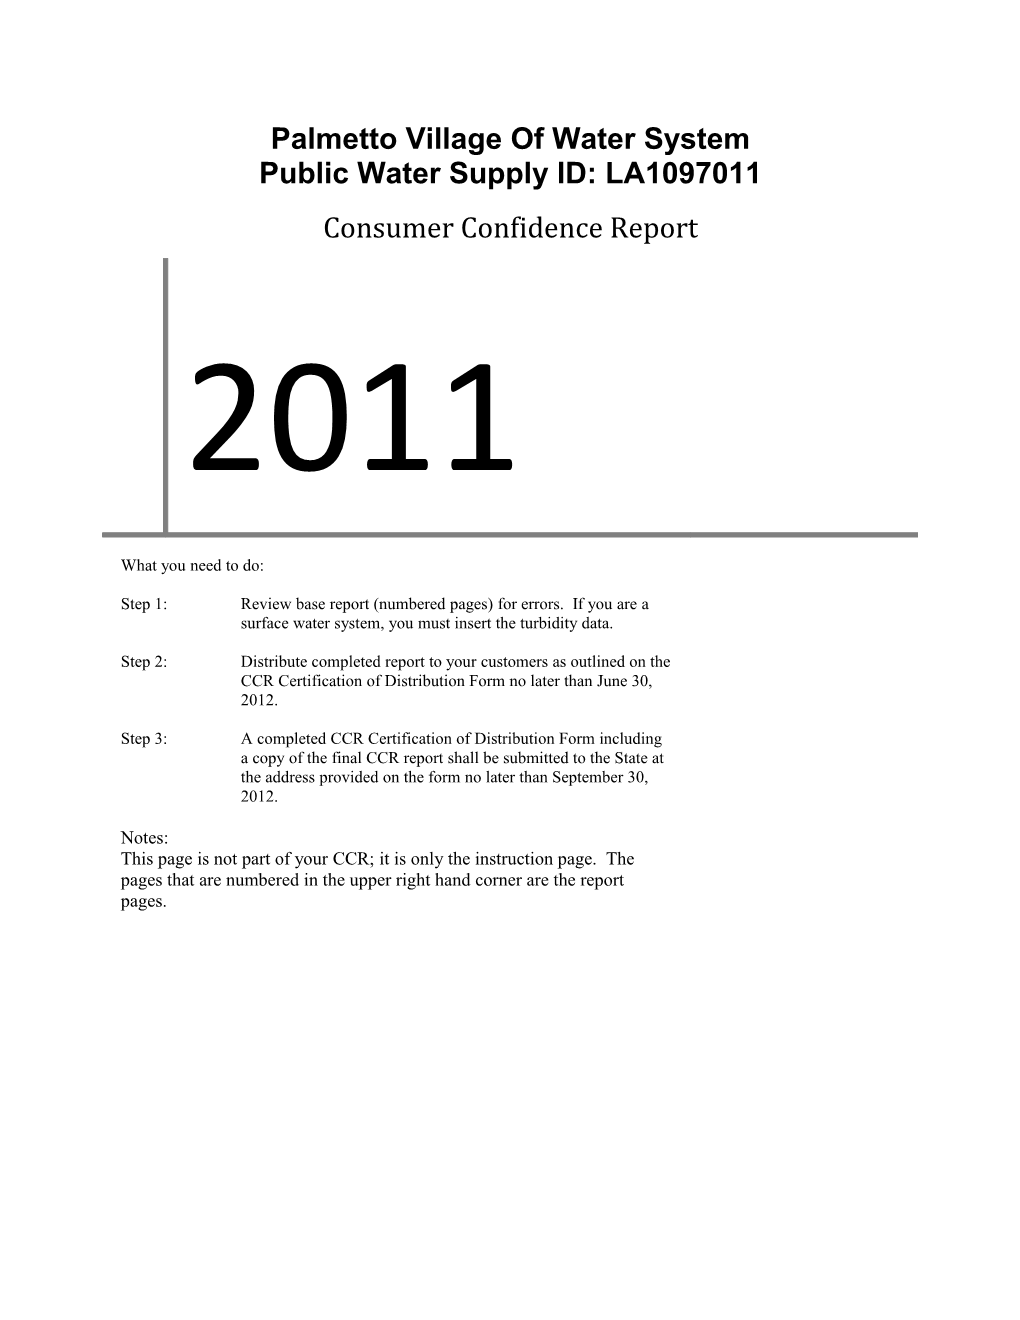 Palmetto Village of Water System